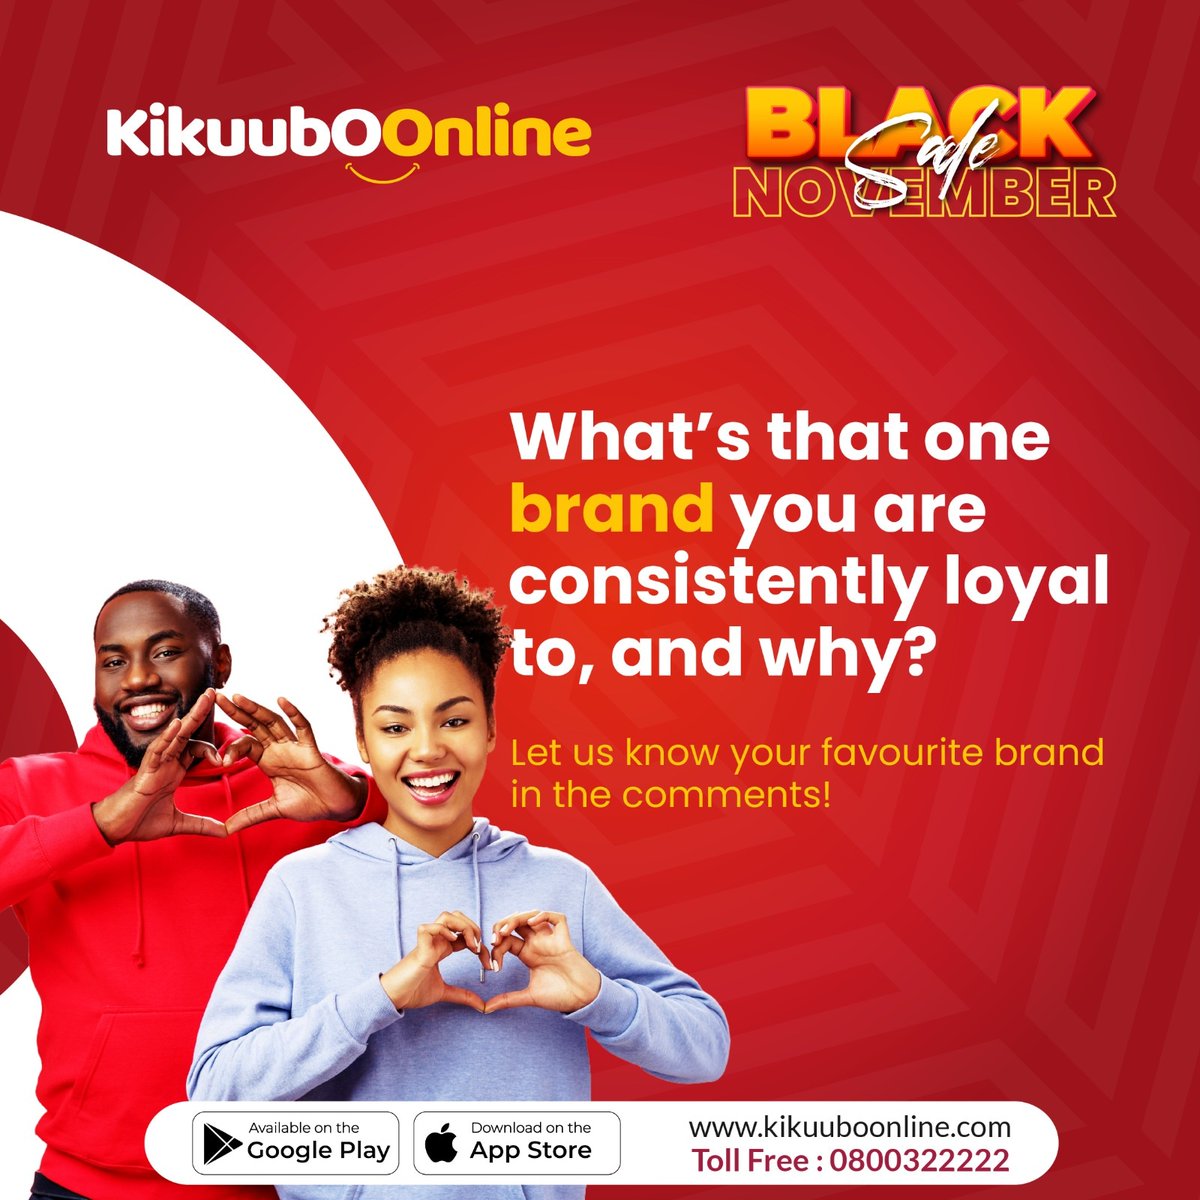 Let us know what your favorite brand is! #Kikuuboonline #BlackNovember